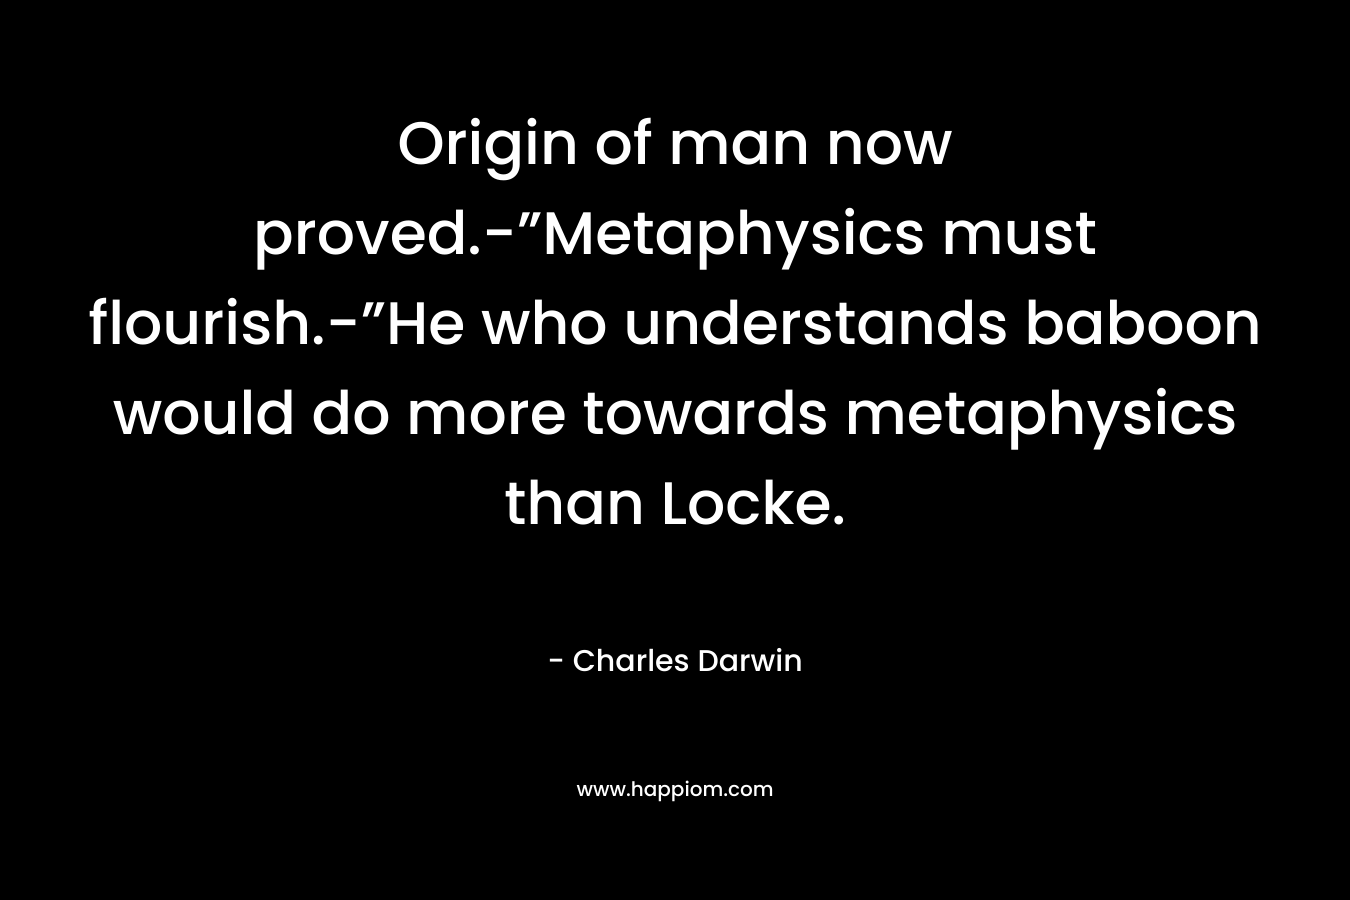 Origin of man now proved.-”Metaphysics must flourish.-”He who understands baboon would do more towards metaphysics than Locke.